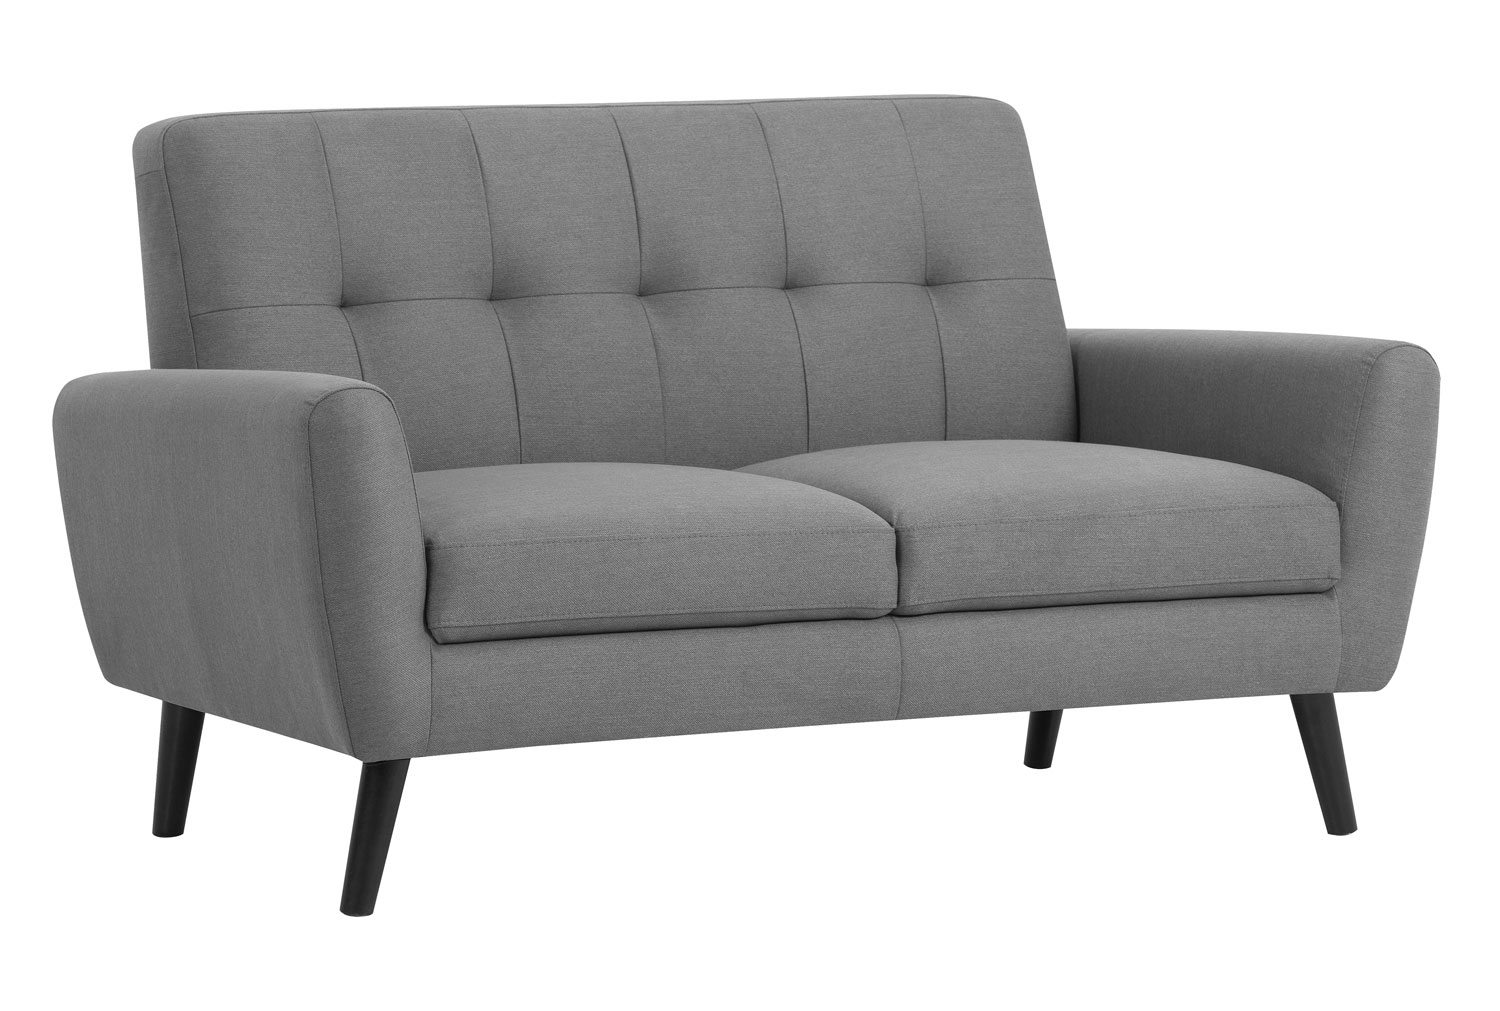 Connelly 2 Seater Sofa (Grey Linen)